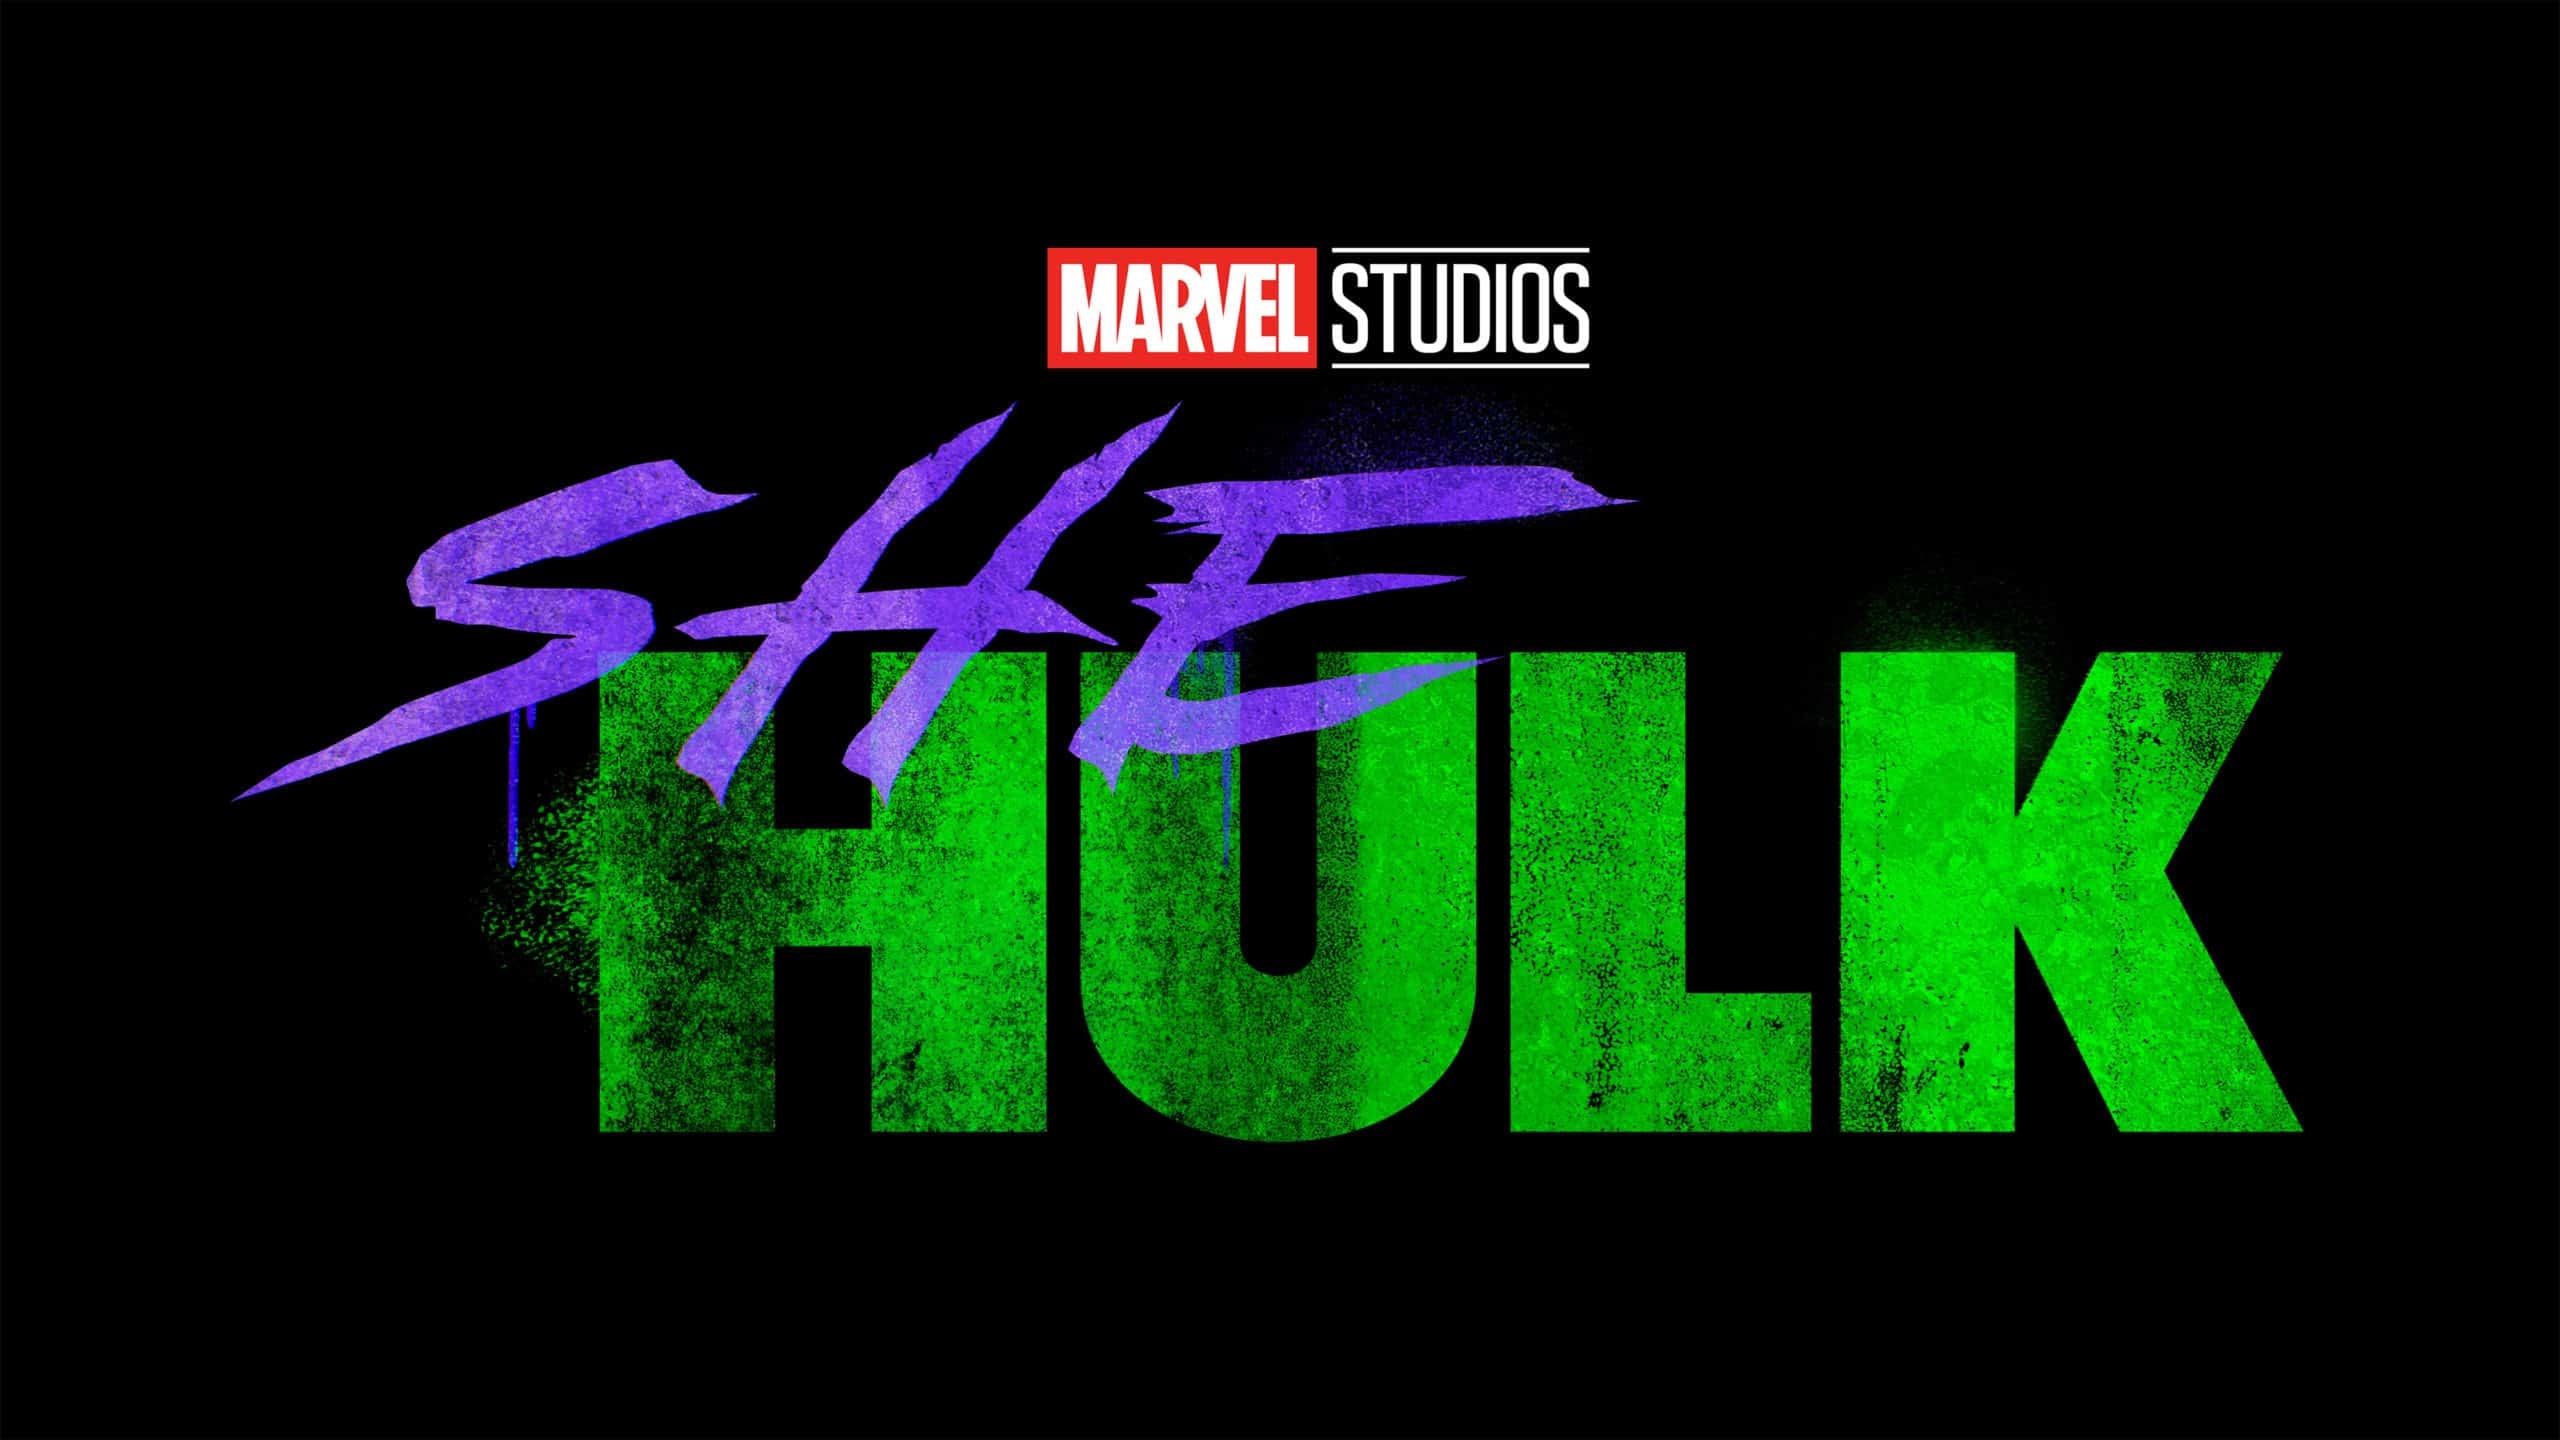 She-Hulk: Attorney at Law (TV Series 2022): Marvel Cinematic Metaverse, Produced by Kevin Feige TV show, Louis D’Esposito, Victoria Alonso. 2560x1440 HD Background.